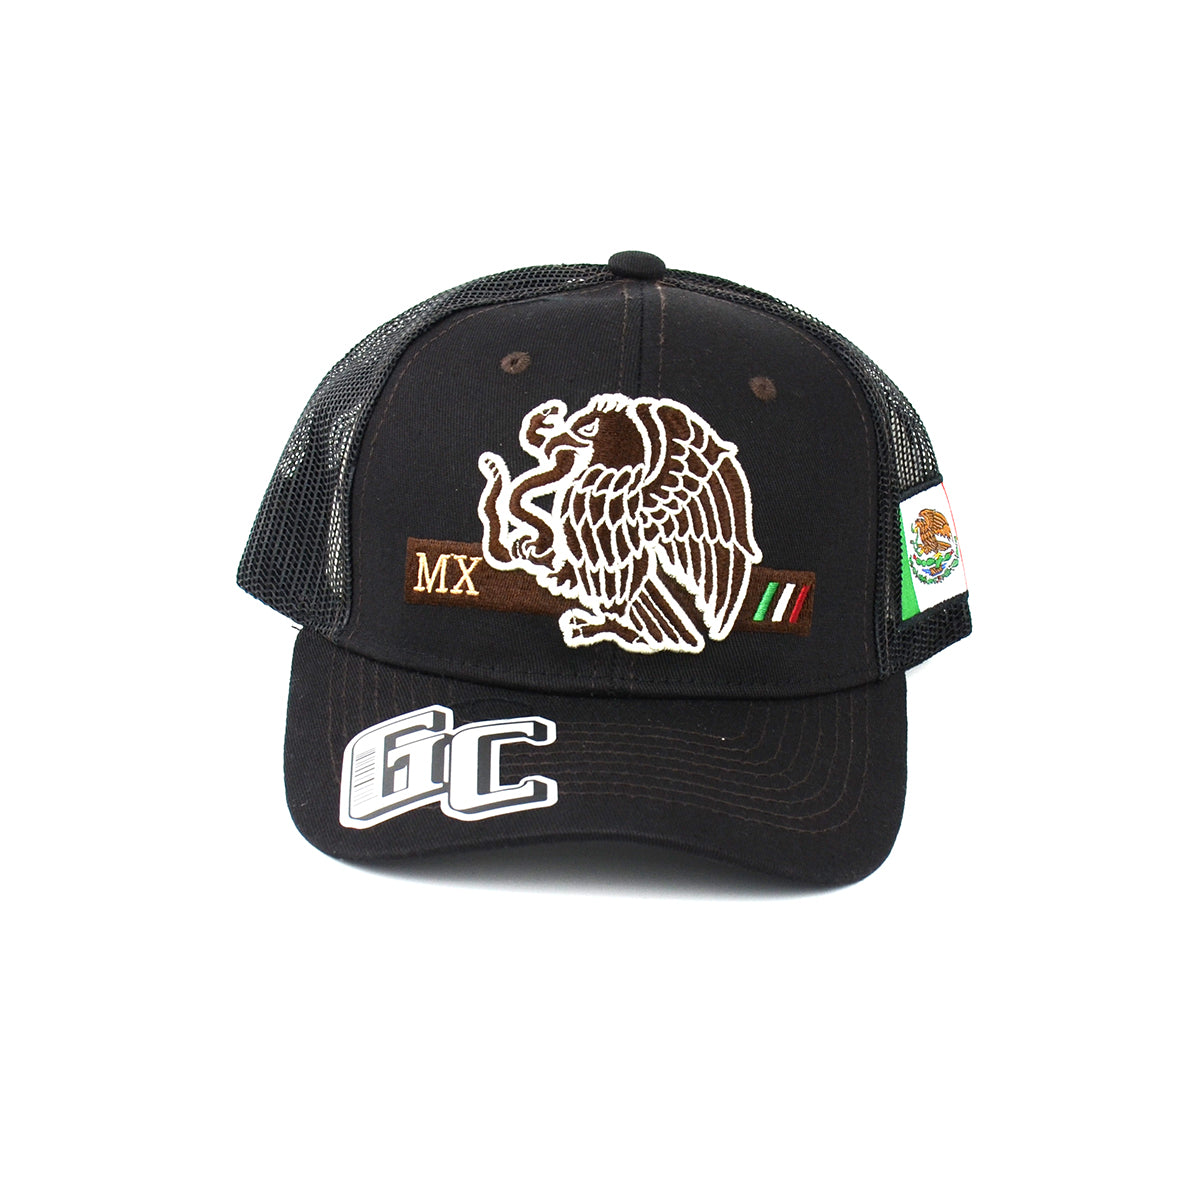 Snapback Curved Hat Mexico Coats Of Arms Flag Embroidered